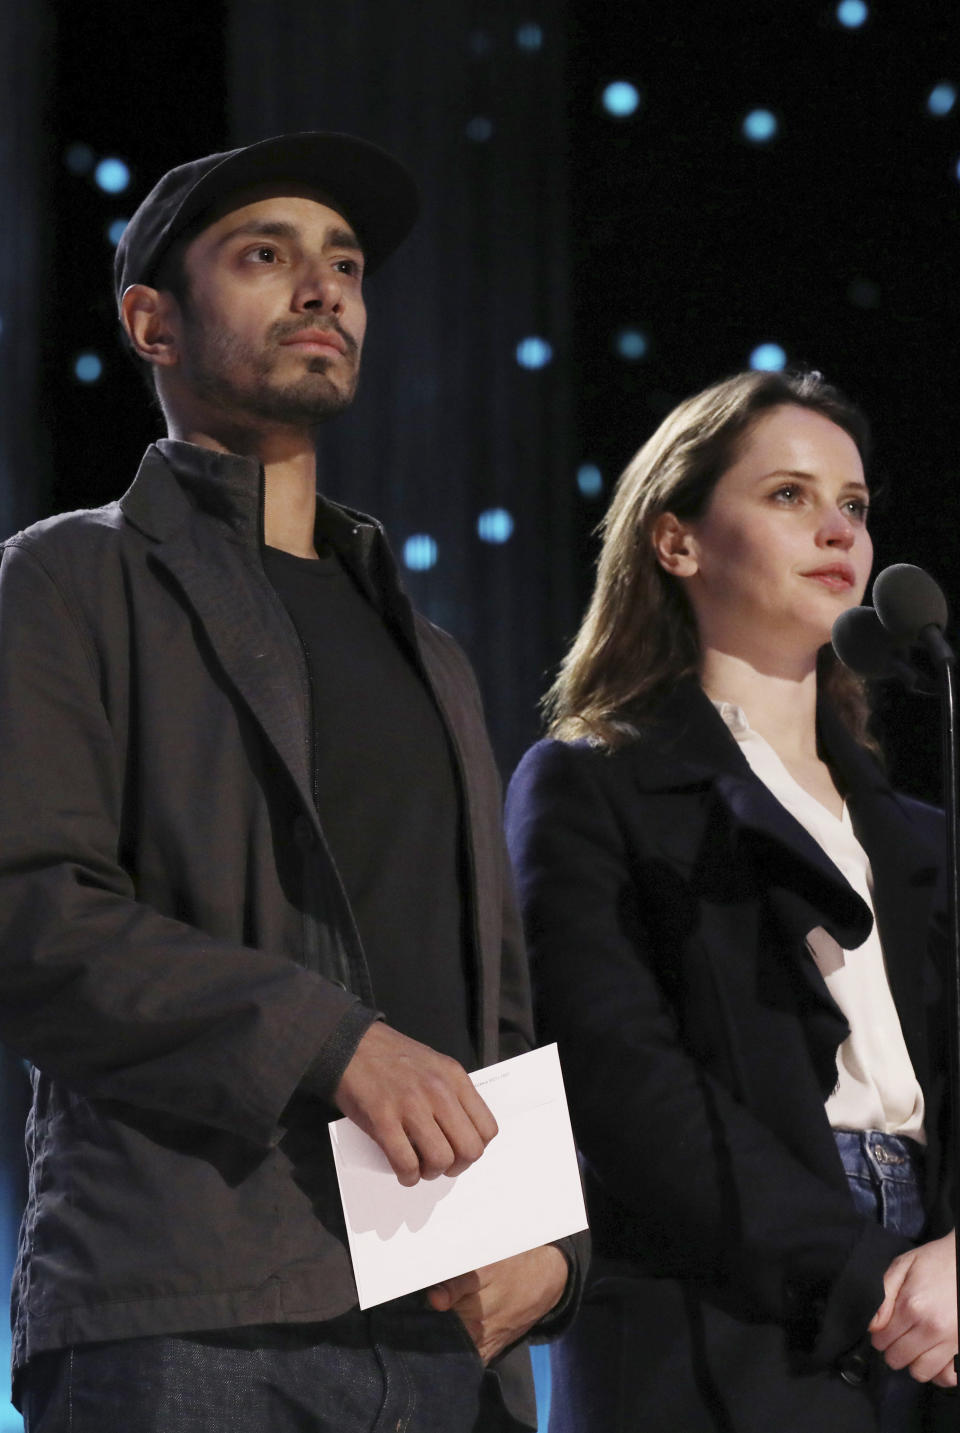 Riz Ahmed, left, and Felicity Jones are seen during rehearsals for the 89th Academy Awards on Saturday, Feb. 25, 2017. The Academy Awards will be held at the Dolby Theatre on Sunday, Feb. 26. (Photo by Matt Sayles/Invision/AP)